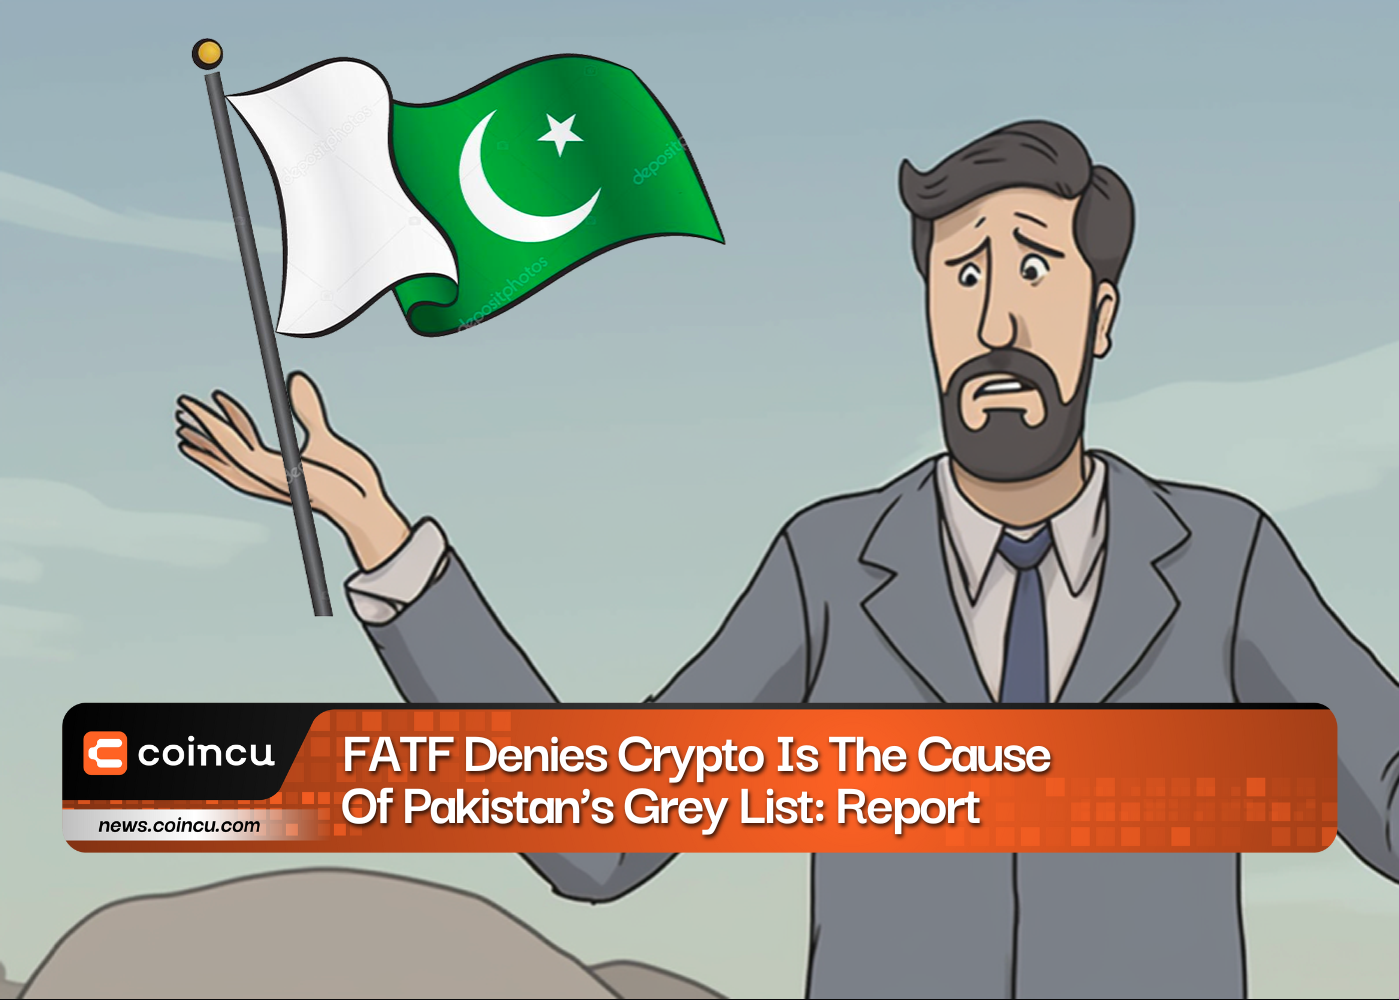 FATF Denies Crypto Is The Cause Of Pakistan's Grey List: Report